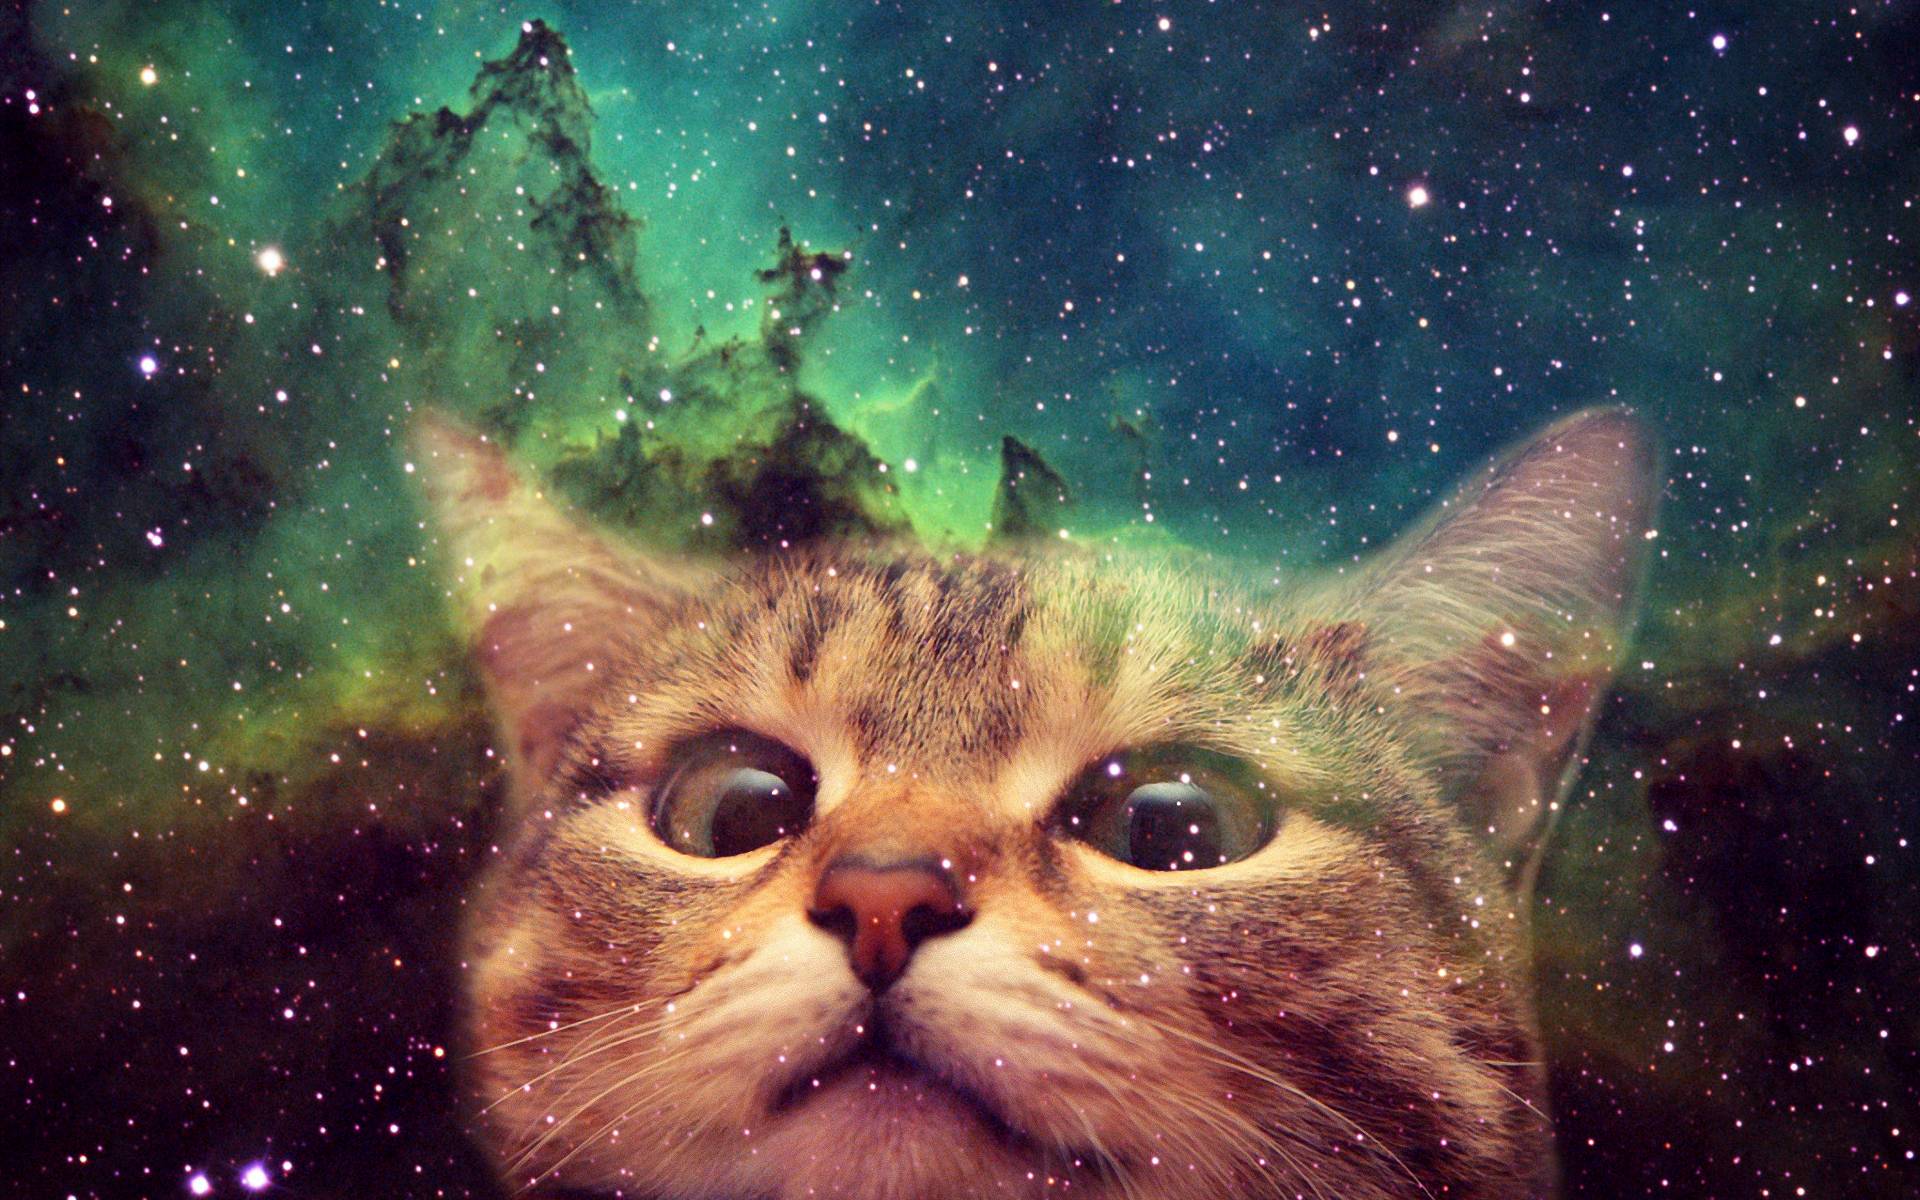 Cats in Space Wallpapers - Top Free Cats in Space Backgrounds